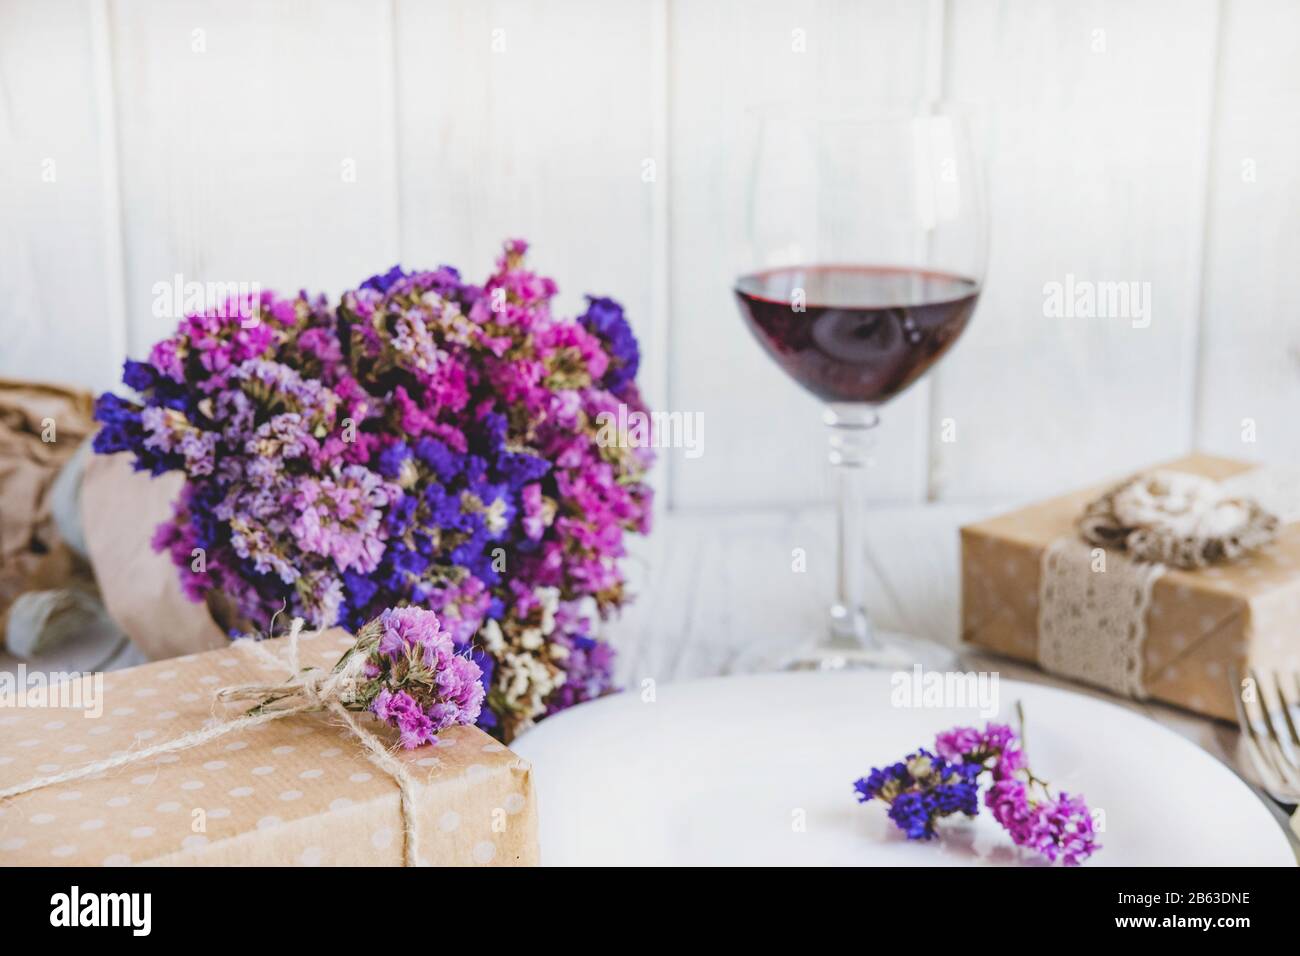 Table setting. Plate on wooden background with gift box, cutlery, a glass of red wine. Stock Photo